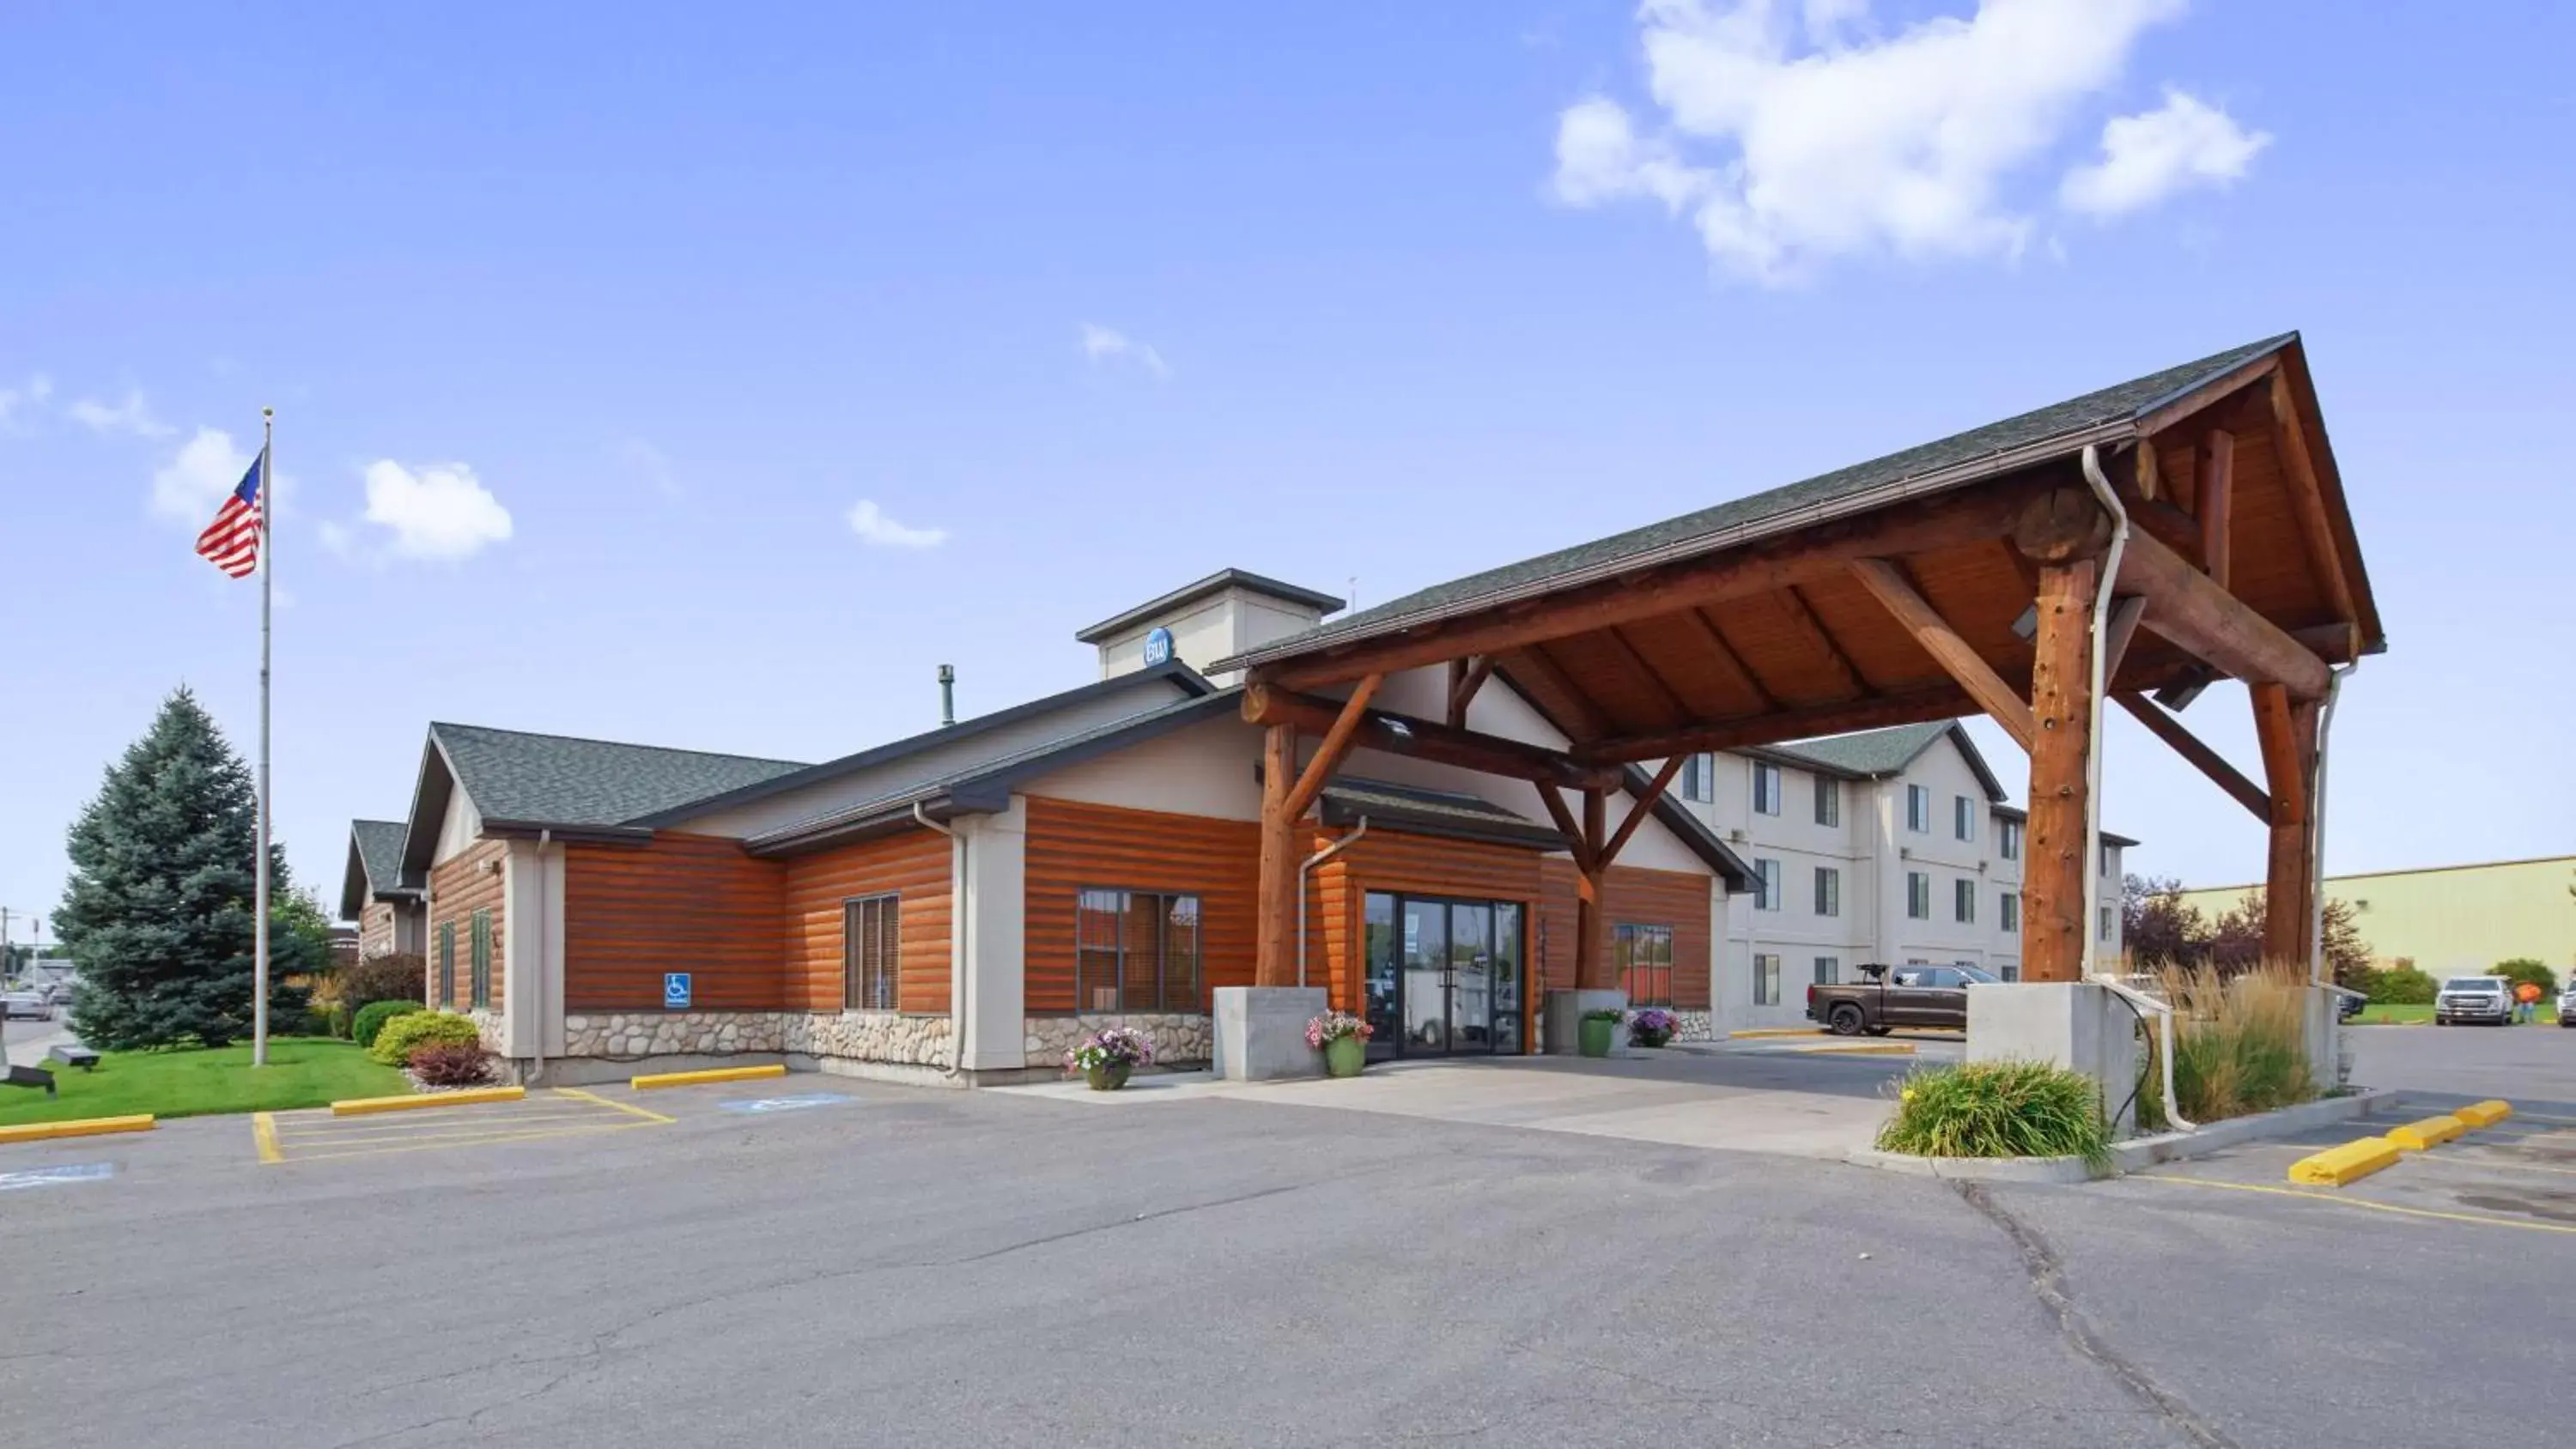 Property Building in Best Western Yellowstone Crossing